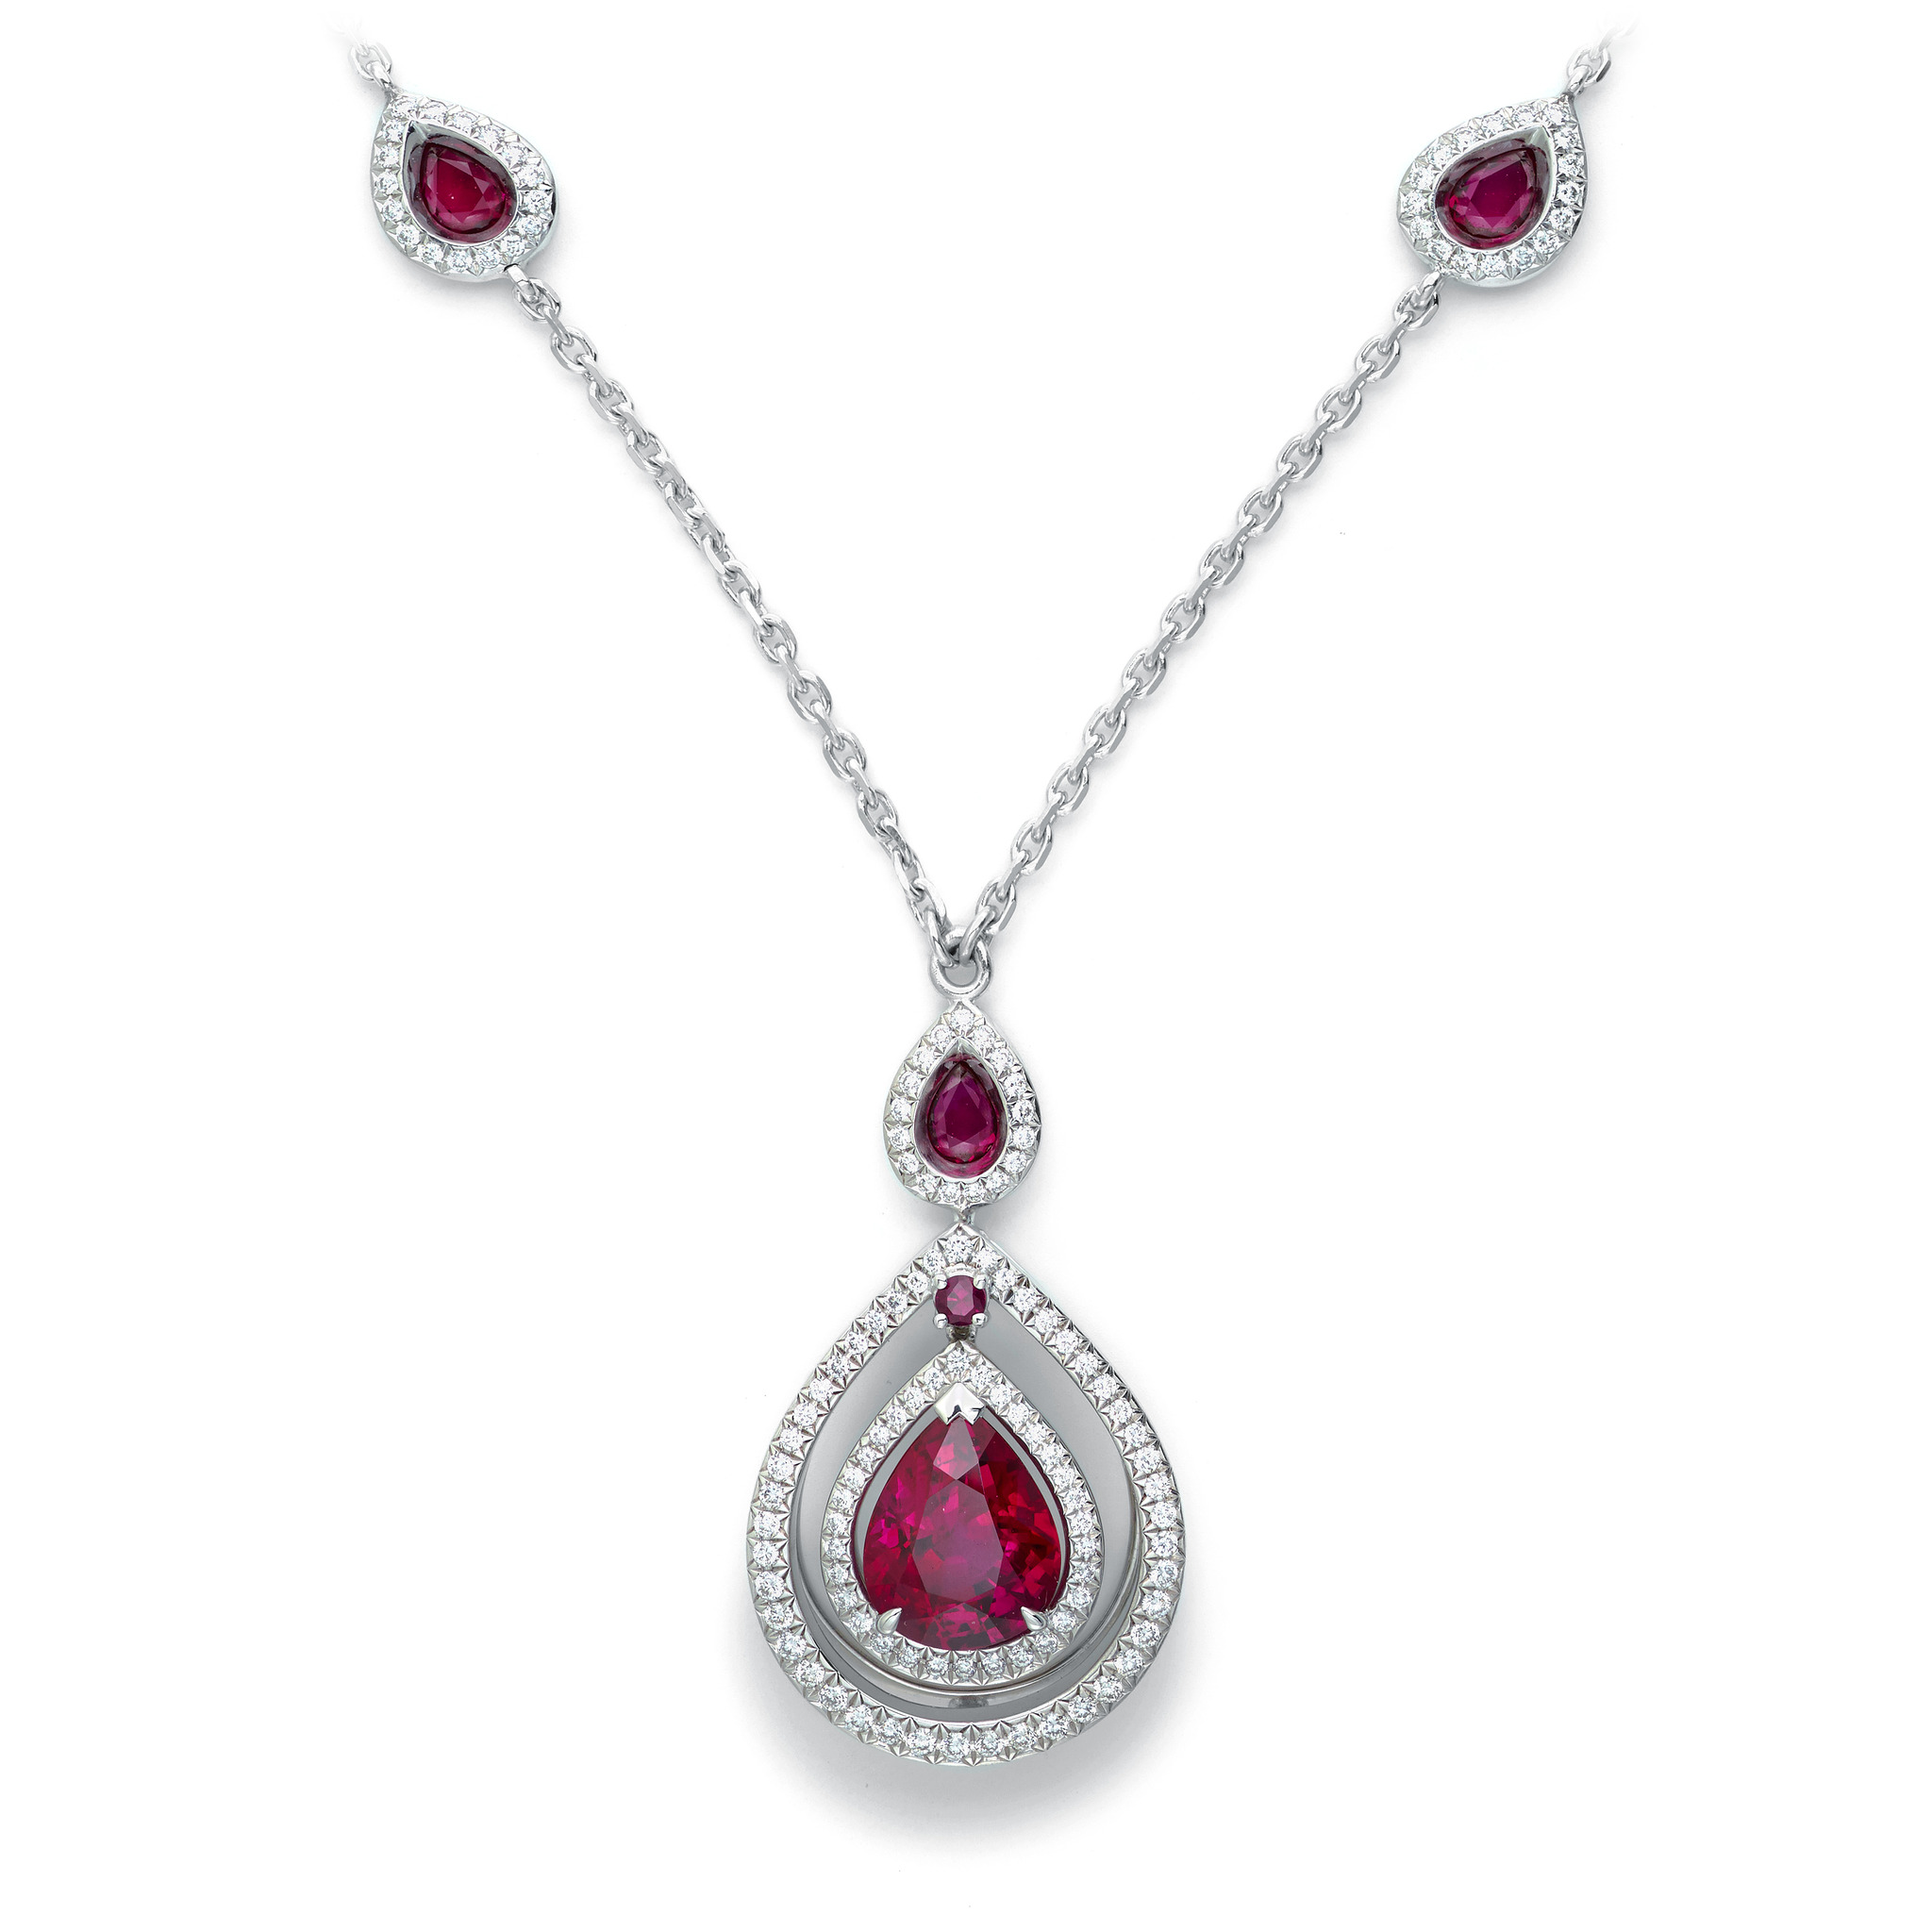 Femmes Bijoux 231.50 cts Earth mined Rich Red Ruby Faceted Perles Collier 